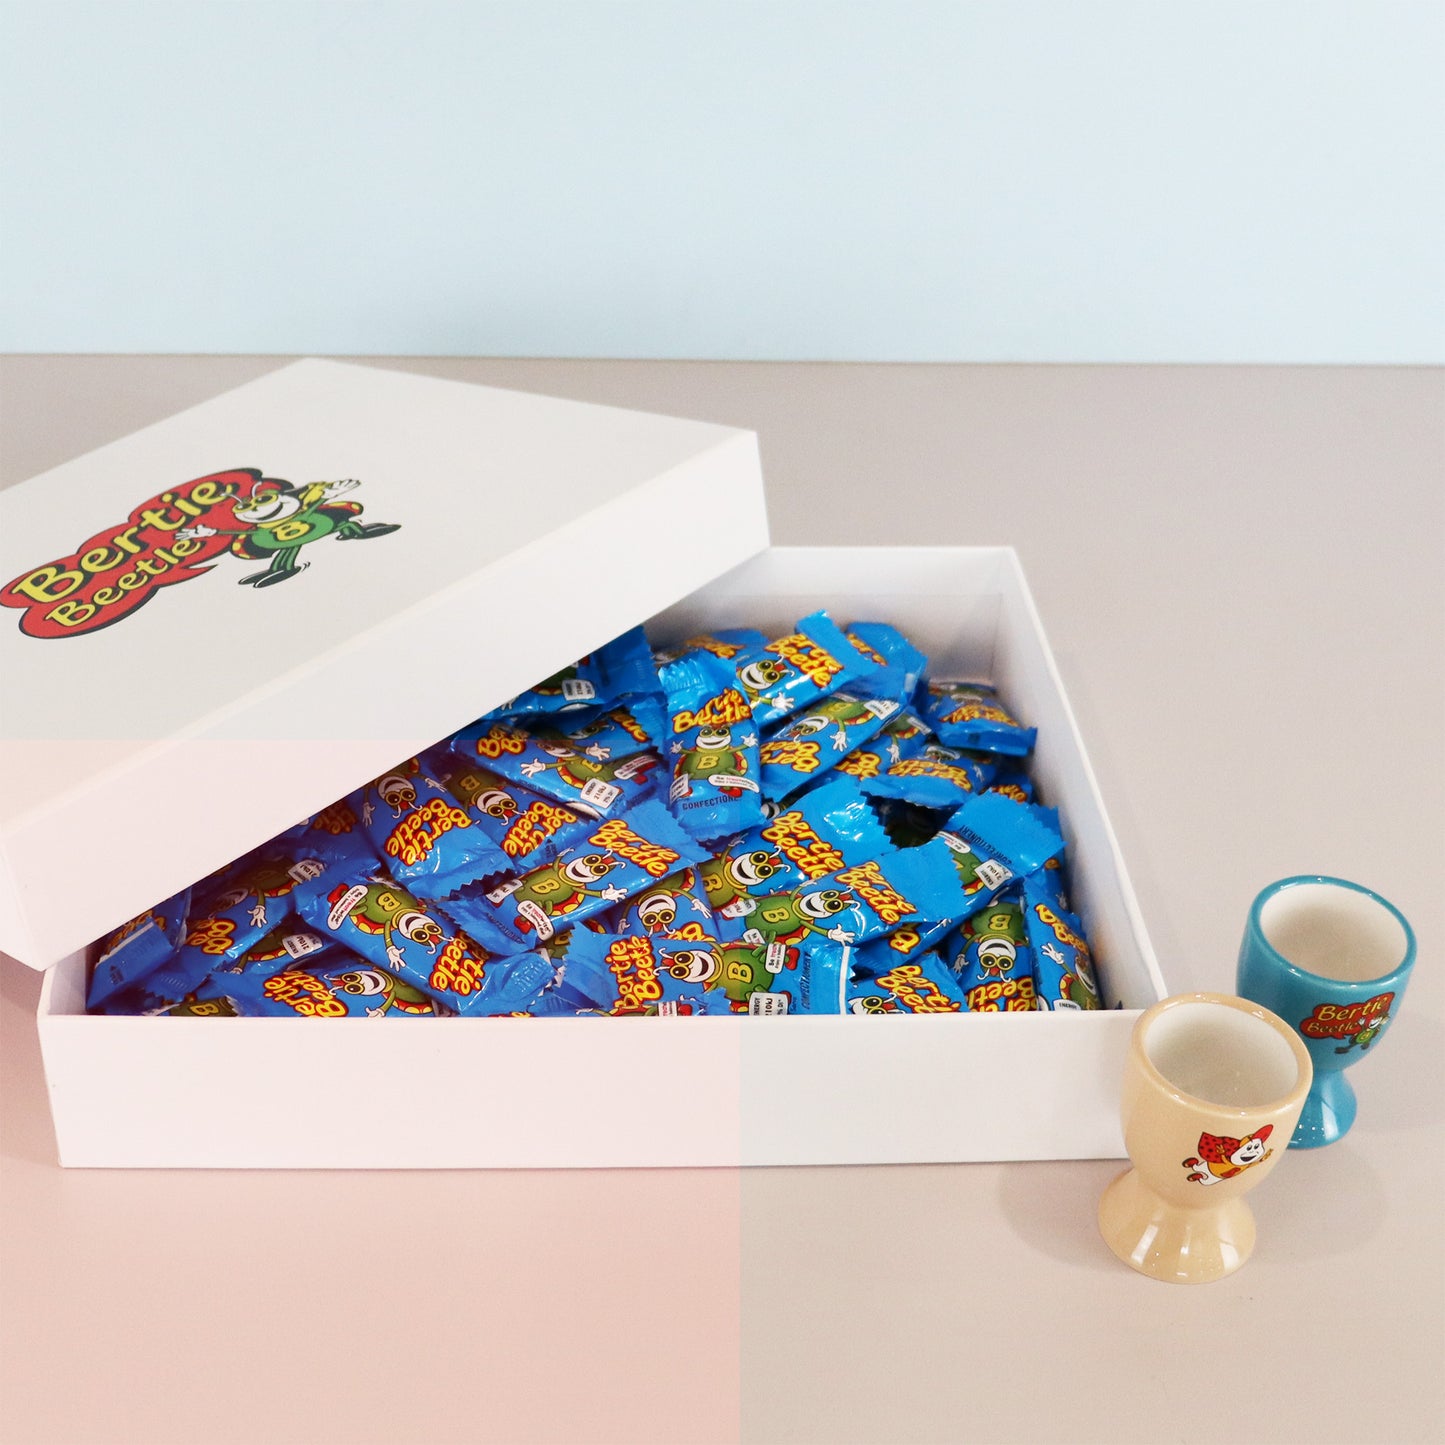 Bertie Beetle Bounty Box - 100 Bertie Beetle chocolates in a gift box with Ceramic Egg Cup Set